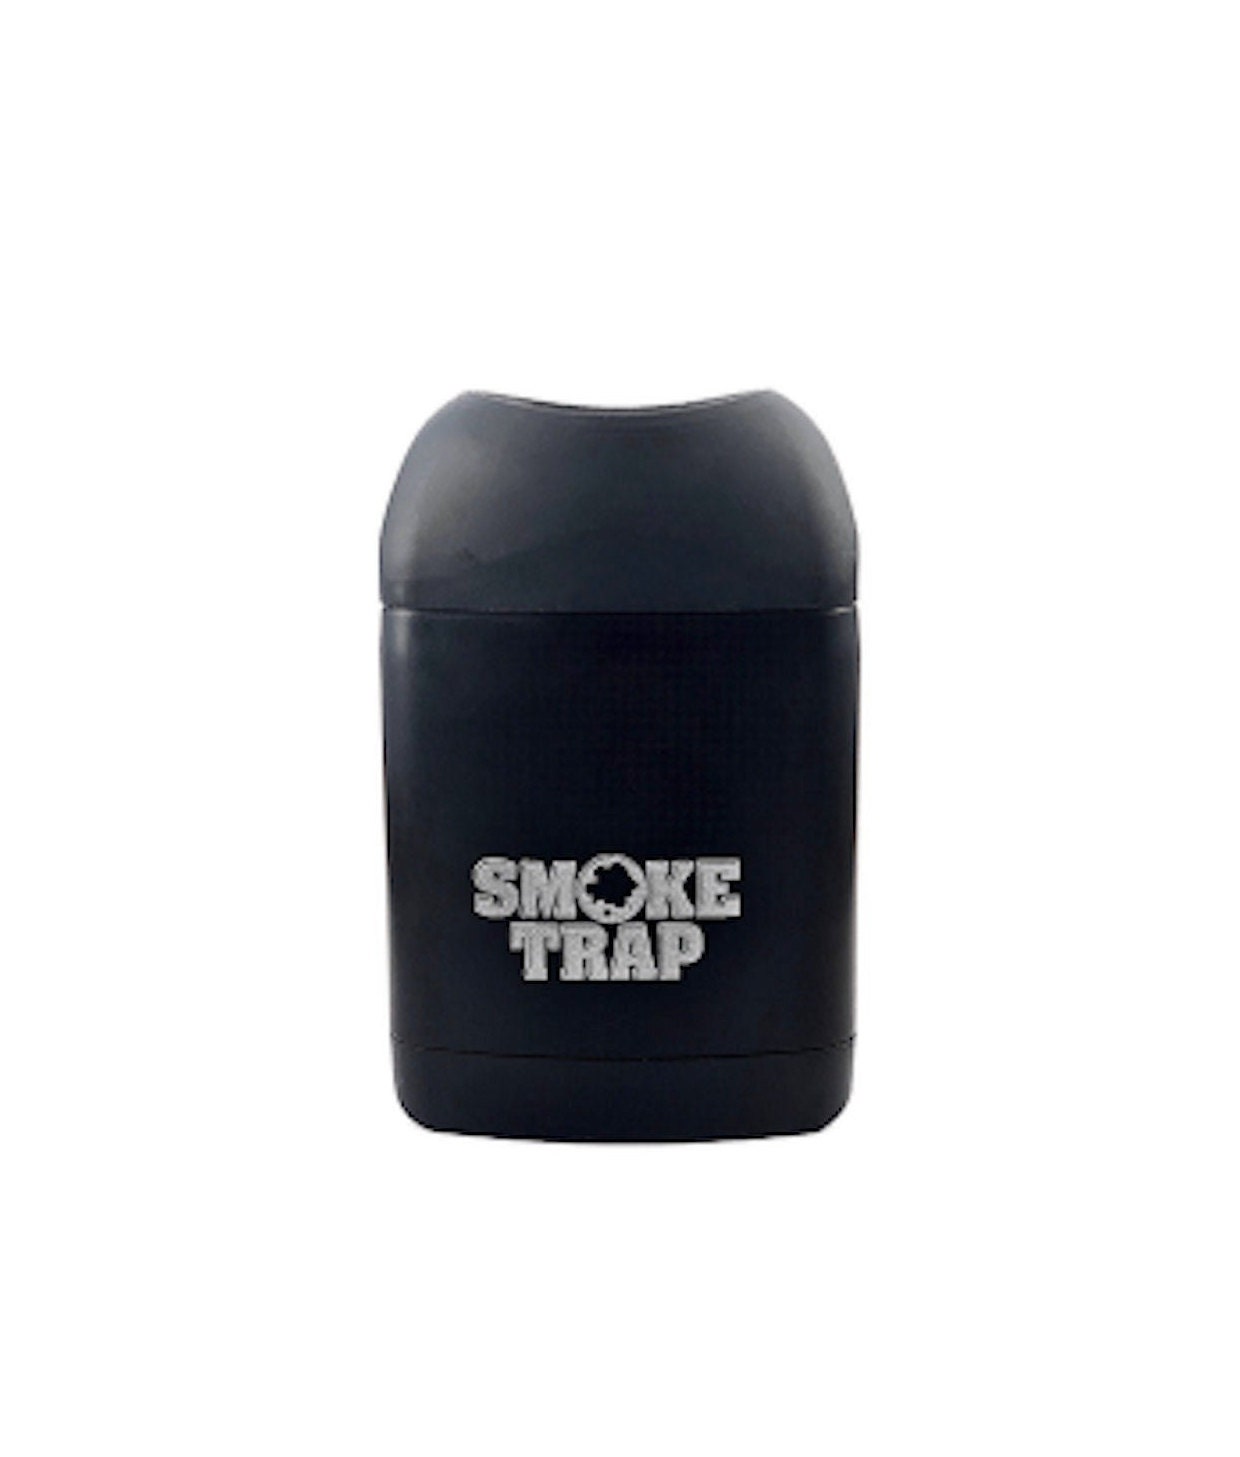 Smoke Trap + | Personal Air Filter (Sploof) - Eco Replaceable Filters - Long Lasting Smoke Filter 500+ Uses with Easy Exhale - Filters Have Zero